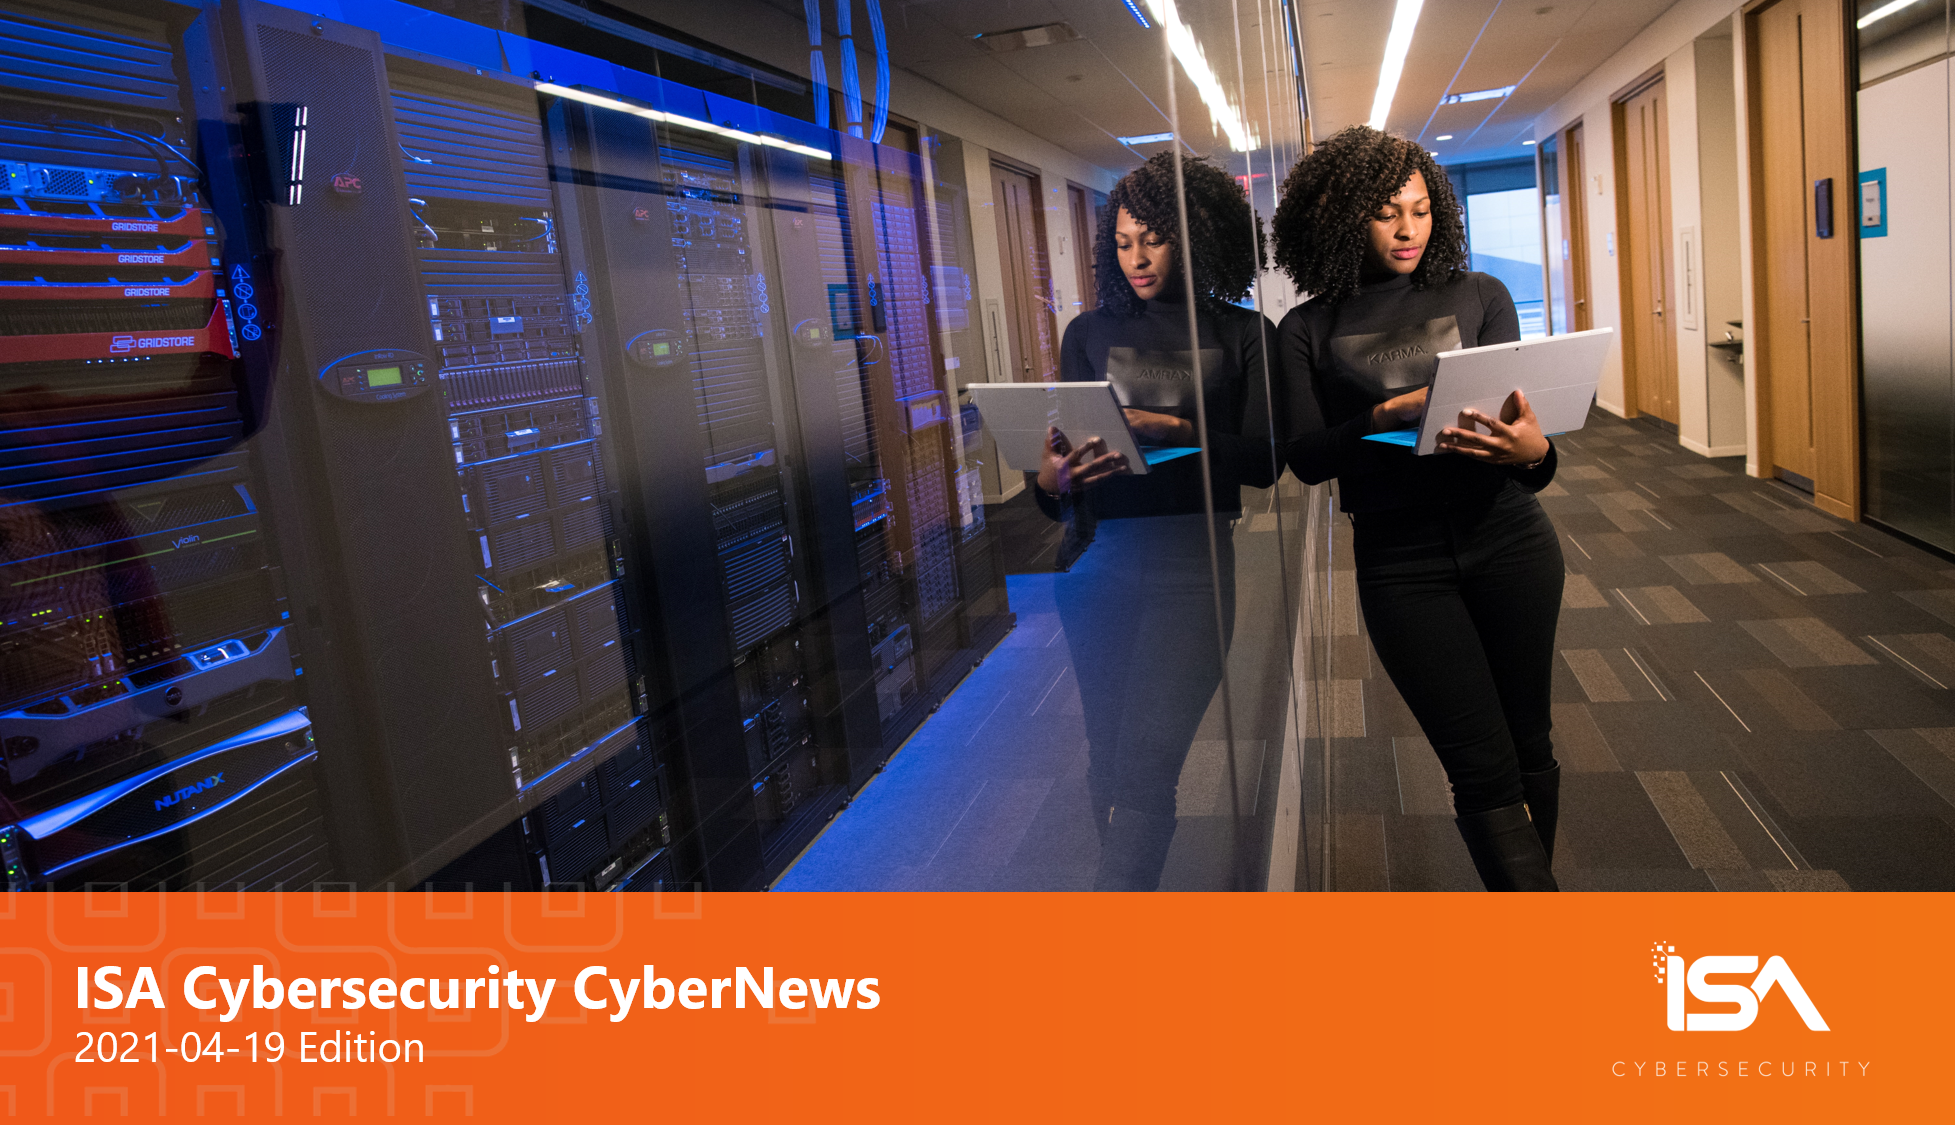 ISA Cybersecurity cyber news banner 2021-04-19 with a woman in black top standing next to server room using laptop